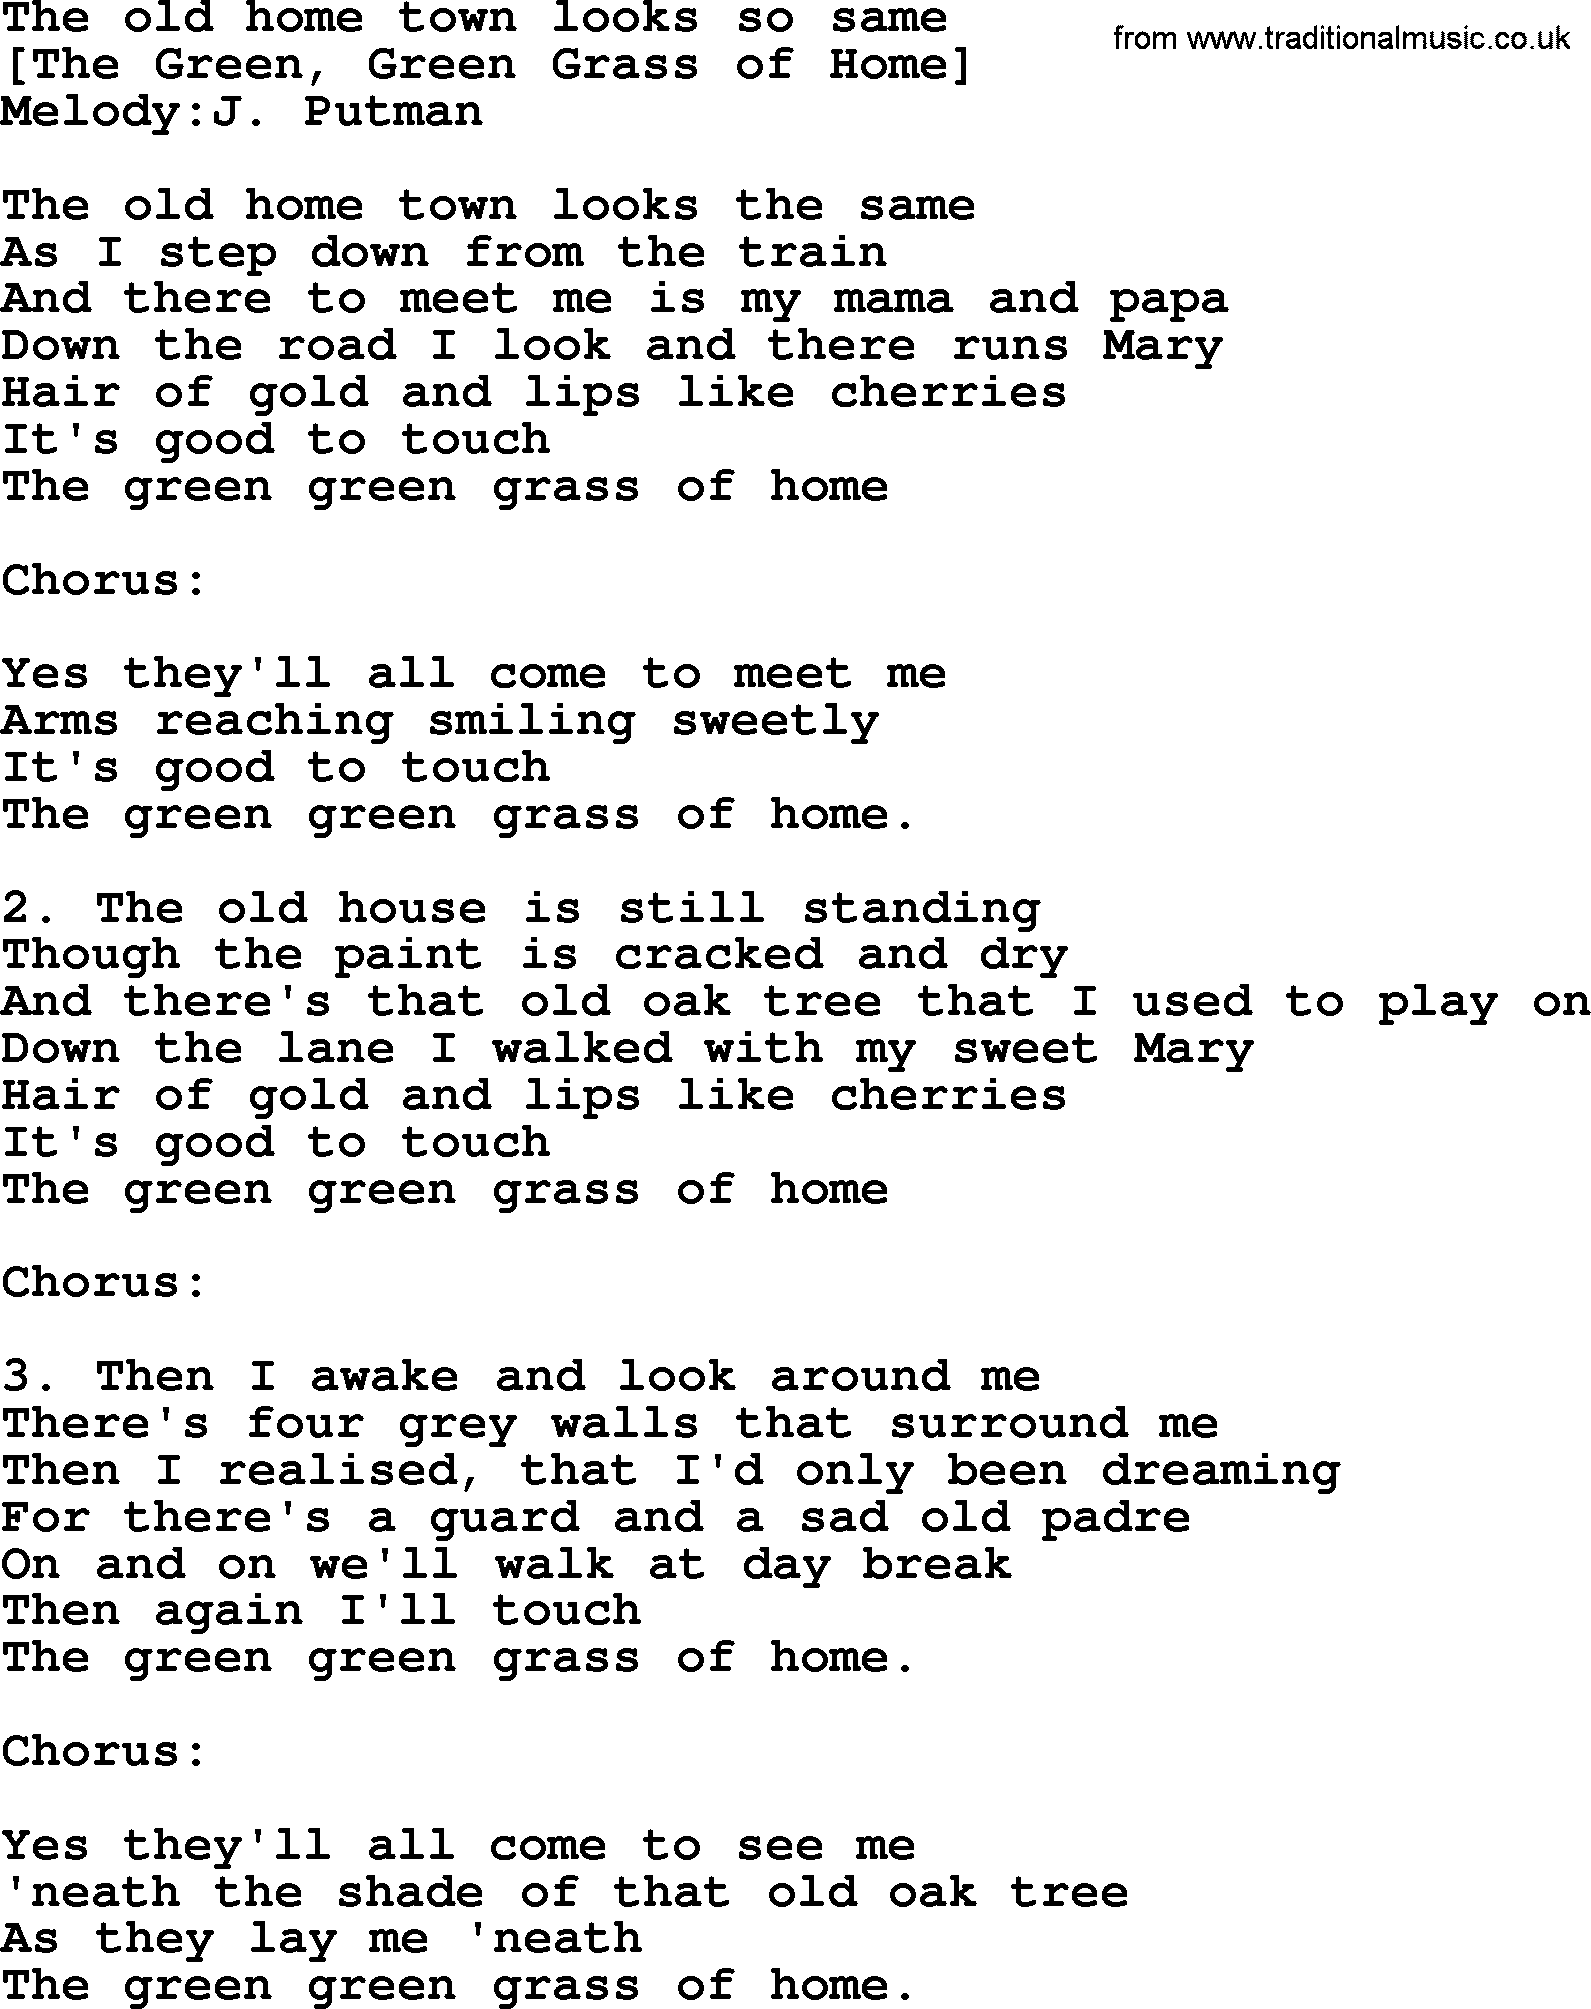 Old American Song: The Old Home Town Looks So Same, lyrics